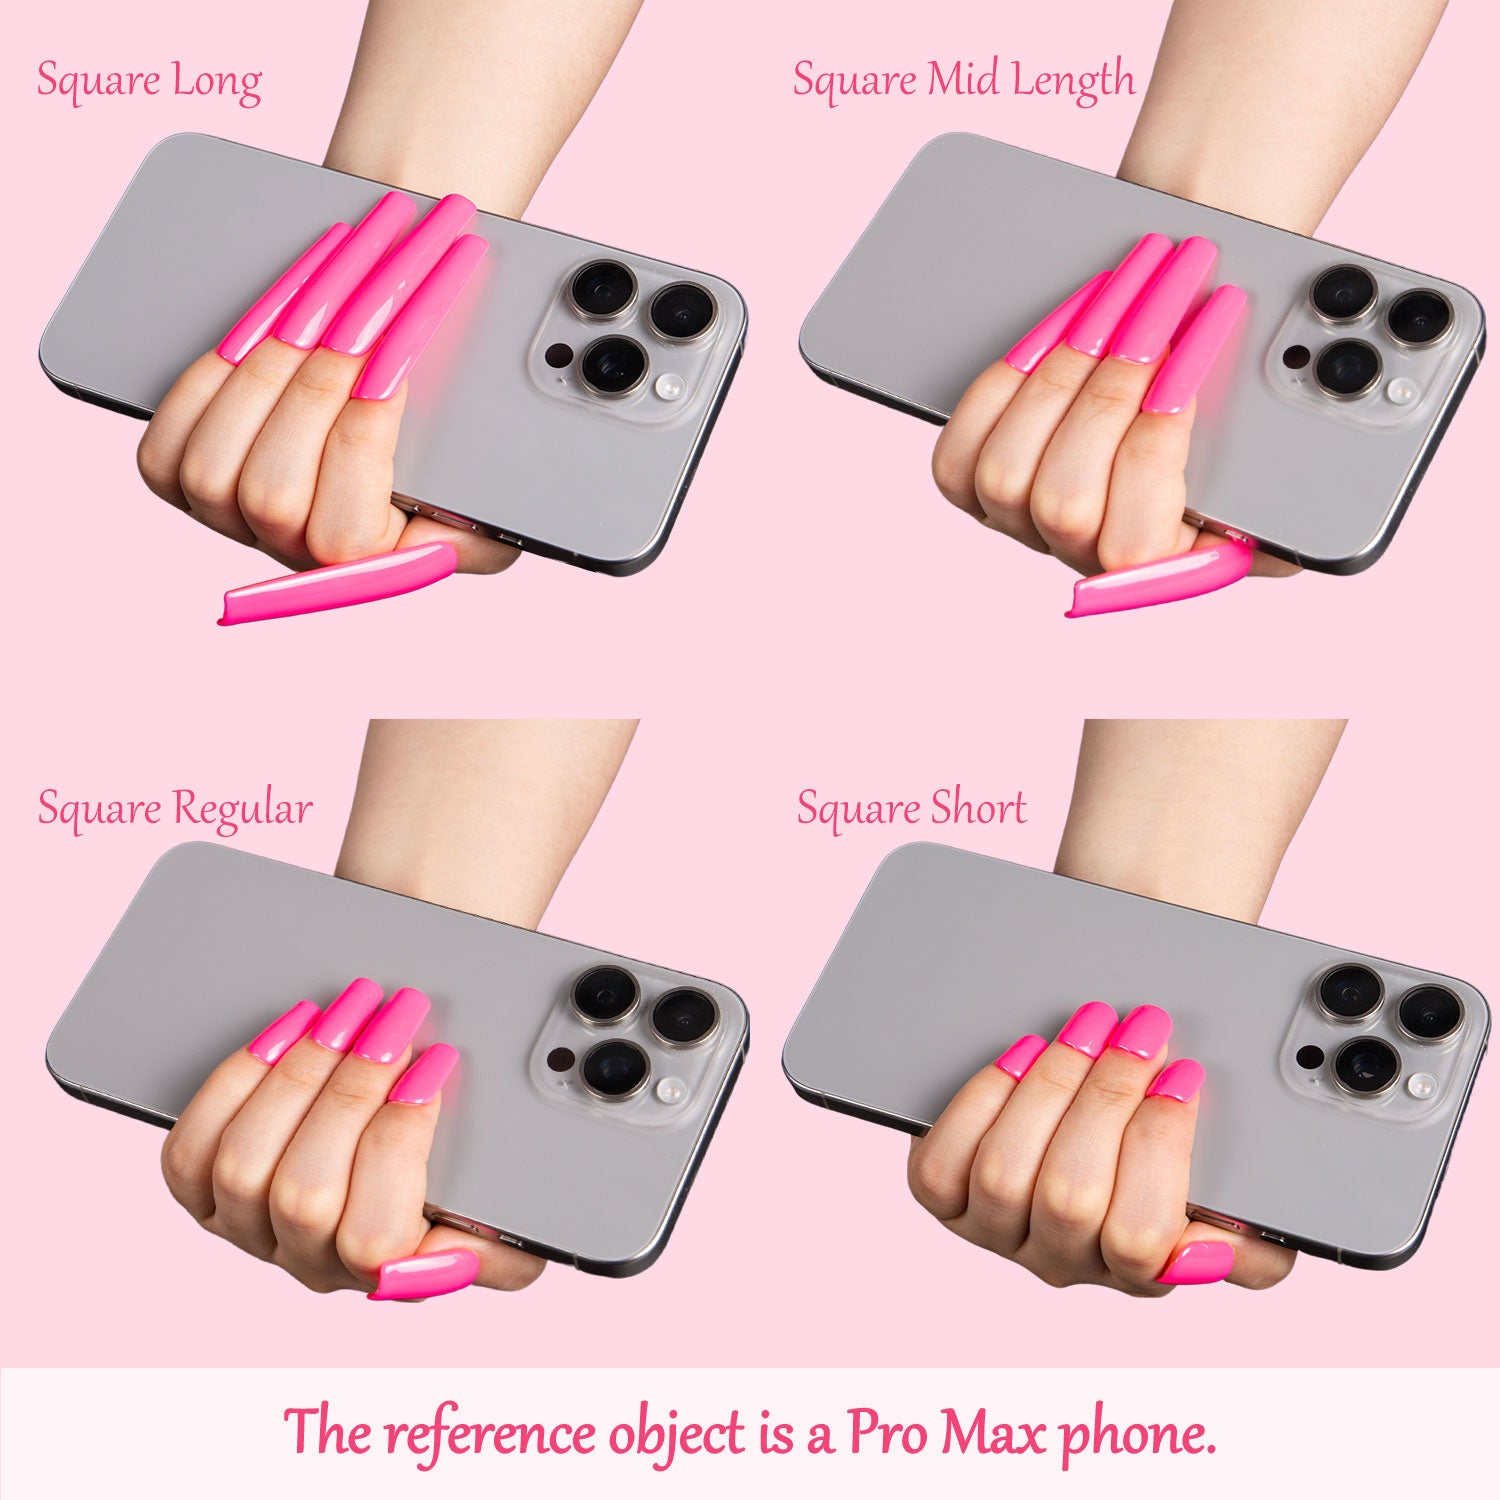 Comparison of four lengths of square press-on acrylic nails in bright pink, demonstrated with Pro Max phone for reference